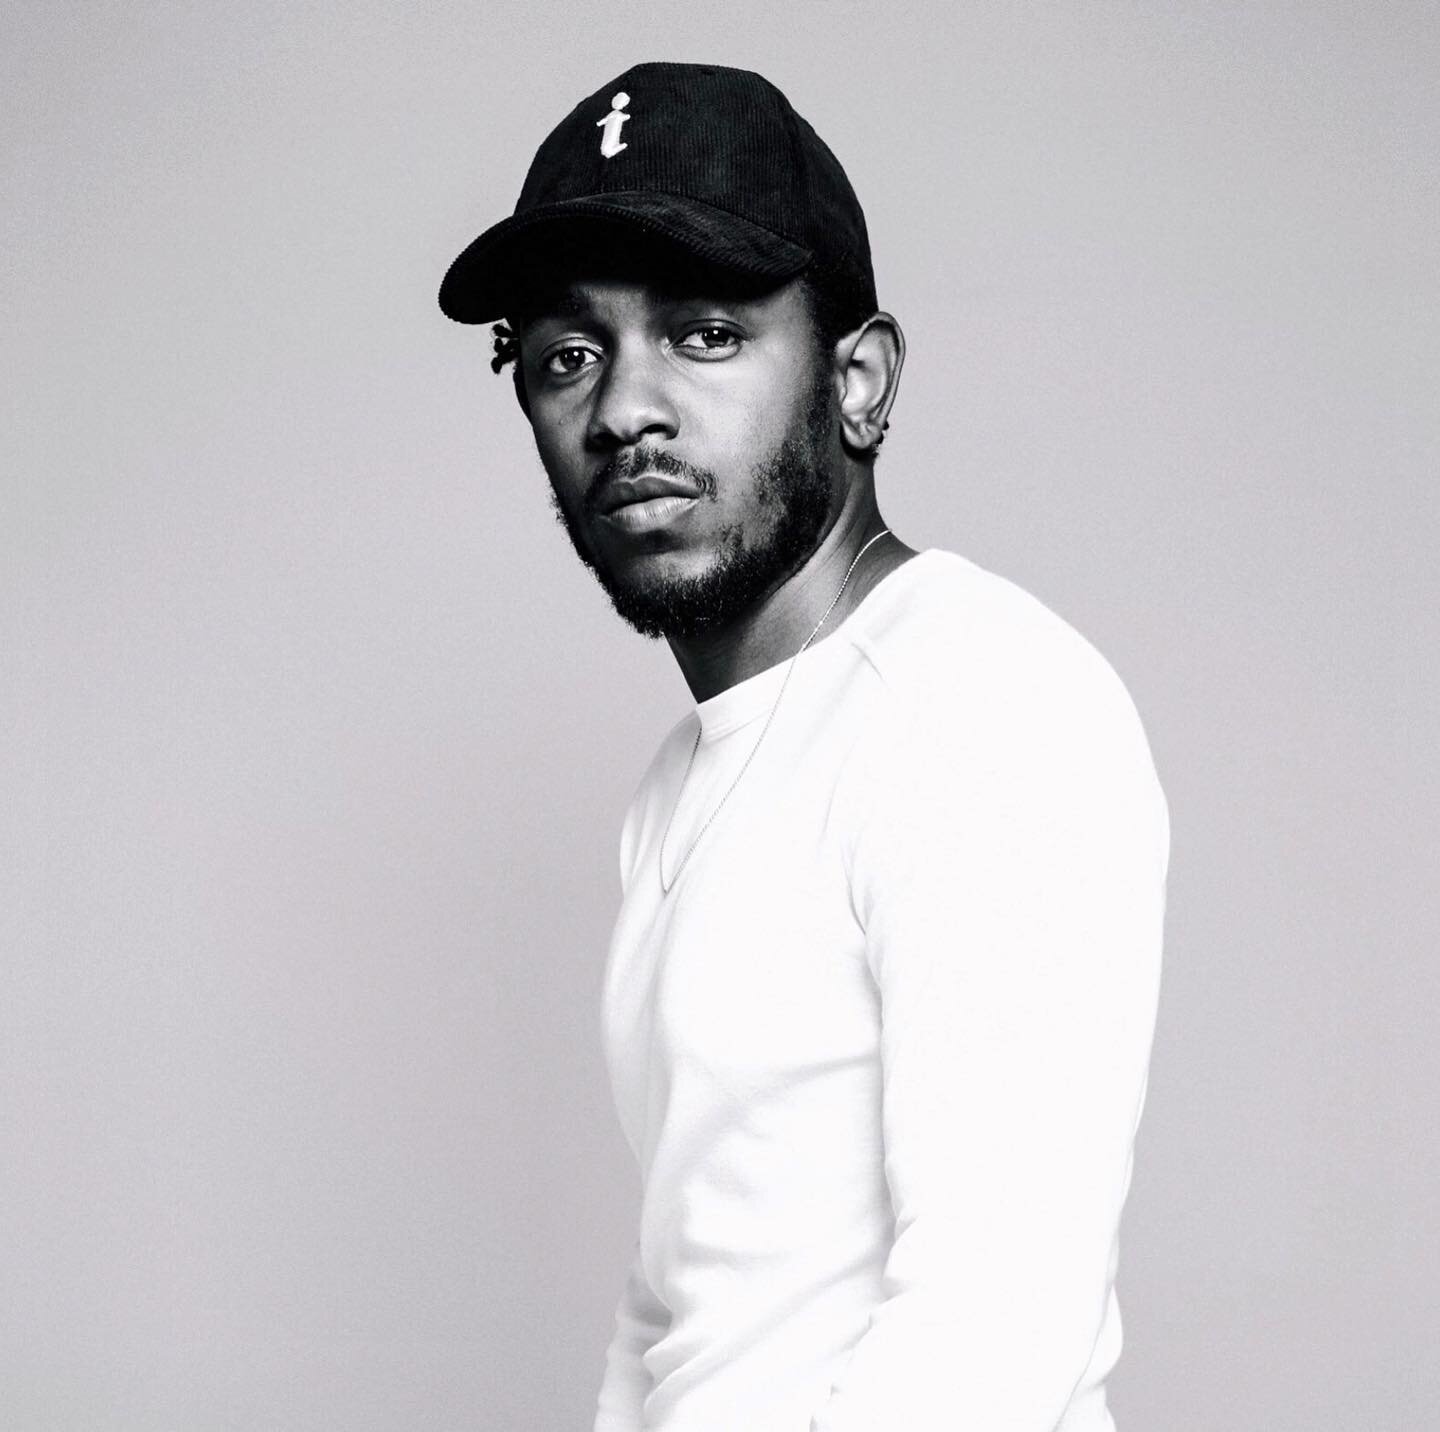 Kendrick Lamar Duckworth (born June 17, 1987) is an American rapper, songwriter, and record producer. Since his debut into the mainstream with Good Kid, M.A.A.D City (2012), Lamar has frequently been regarded as one of the most influential artists of